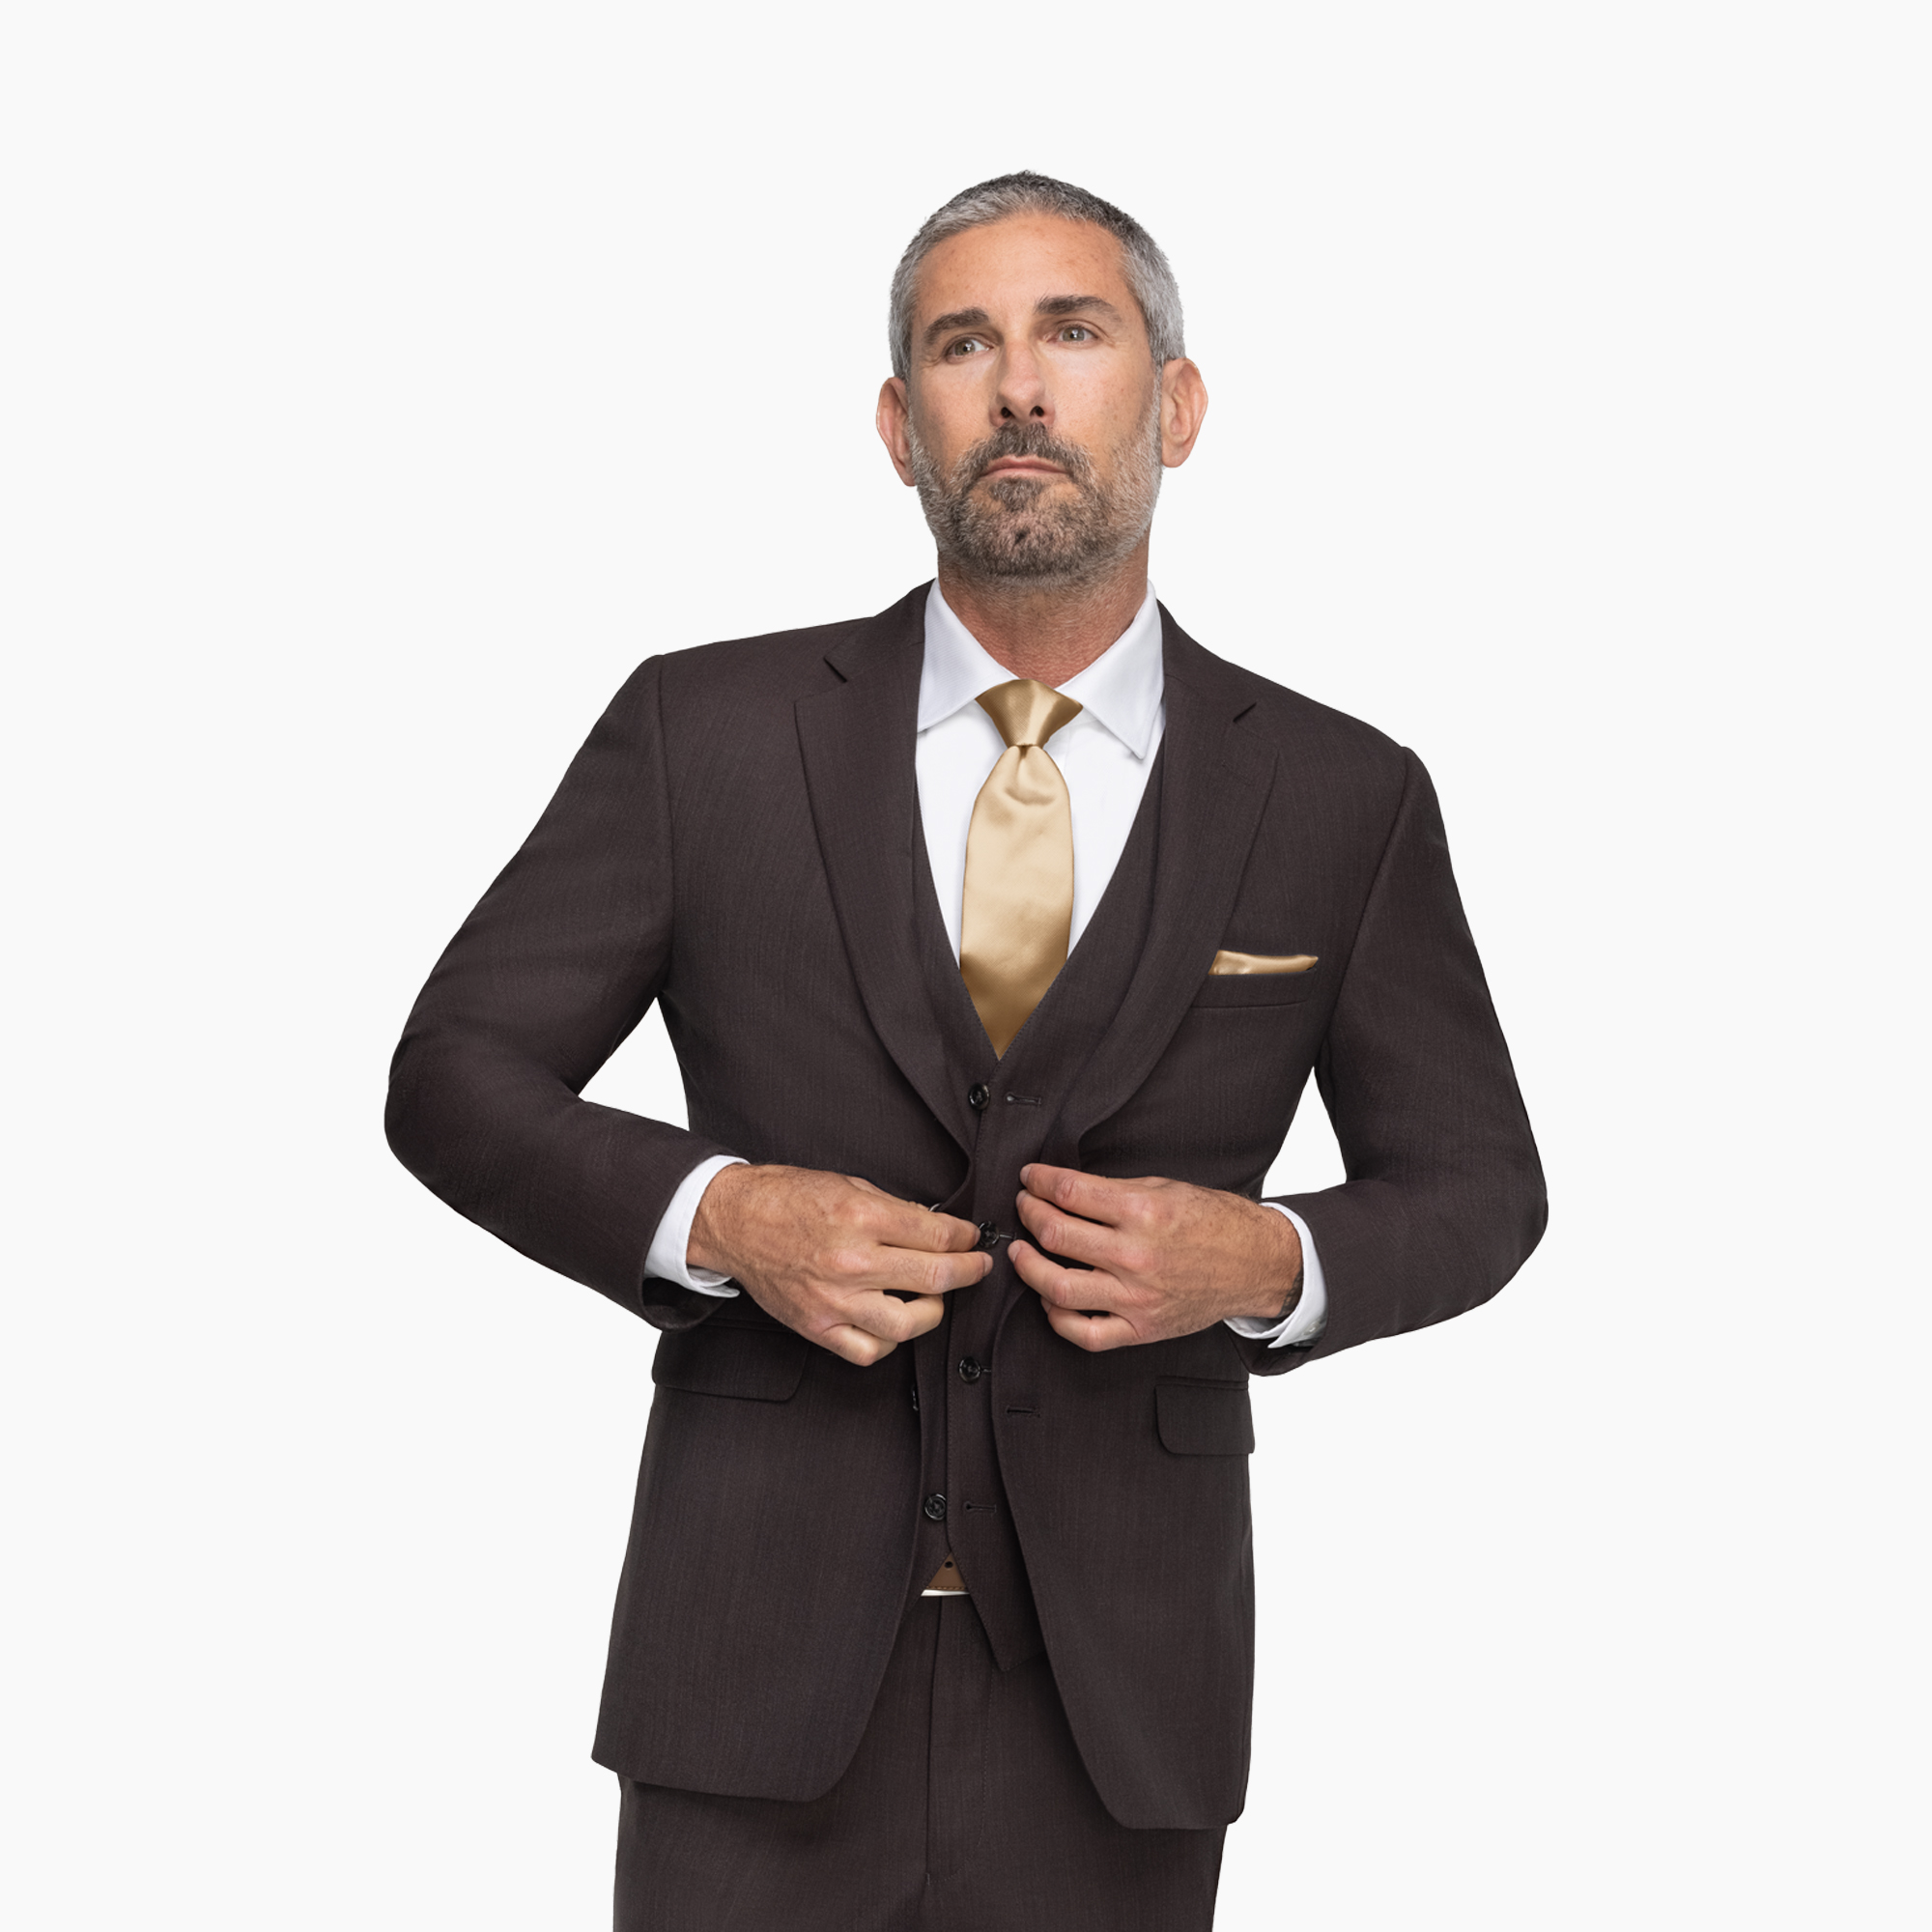 Tan Suits For Weddings | Great for proms or any formal event. Menswear